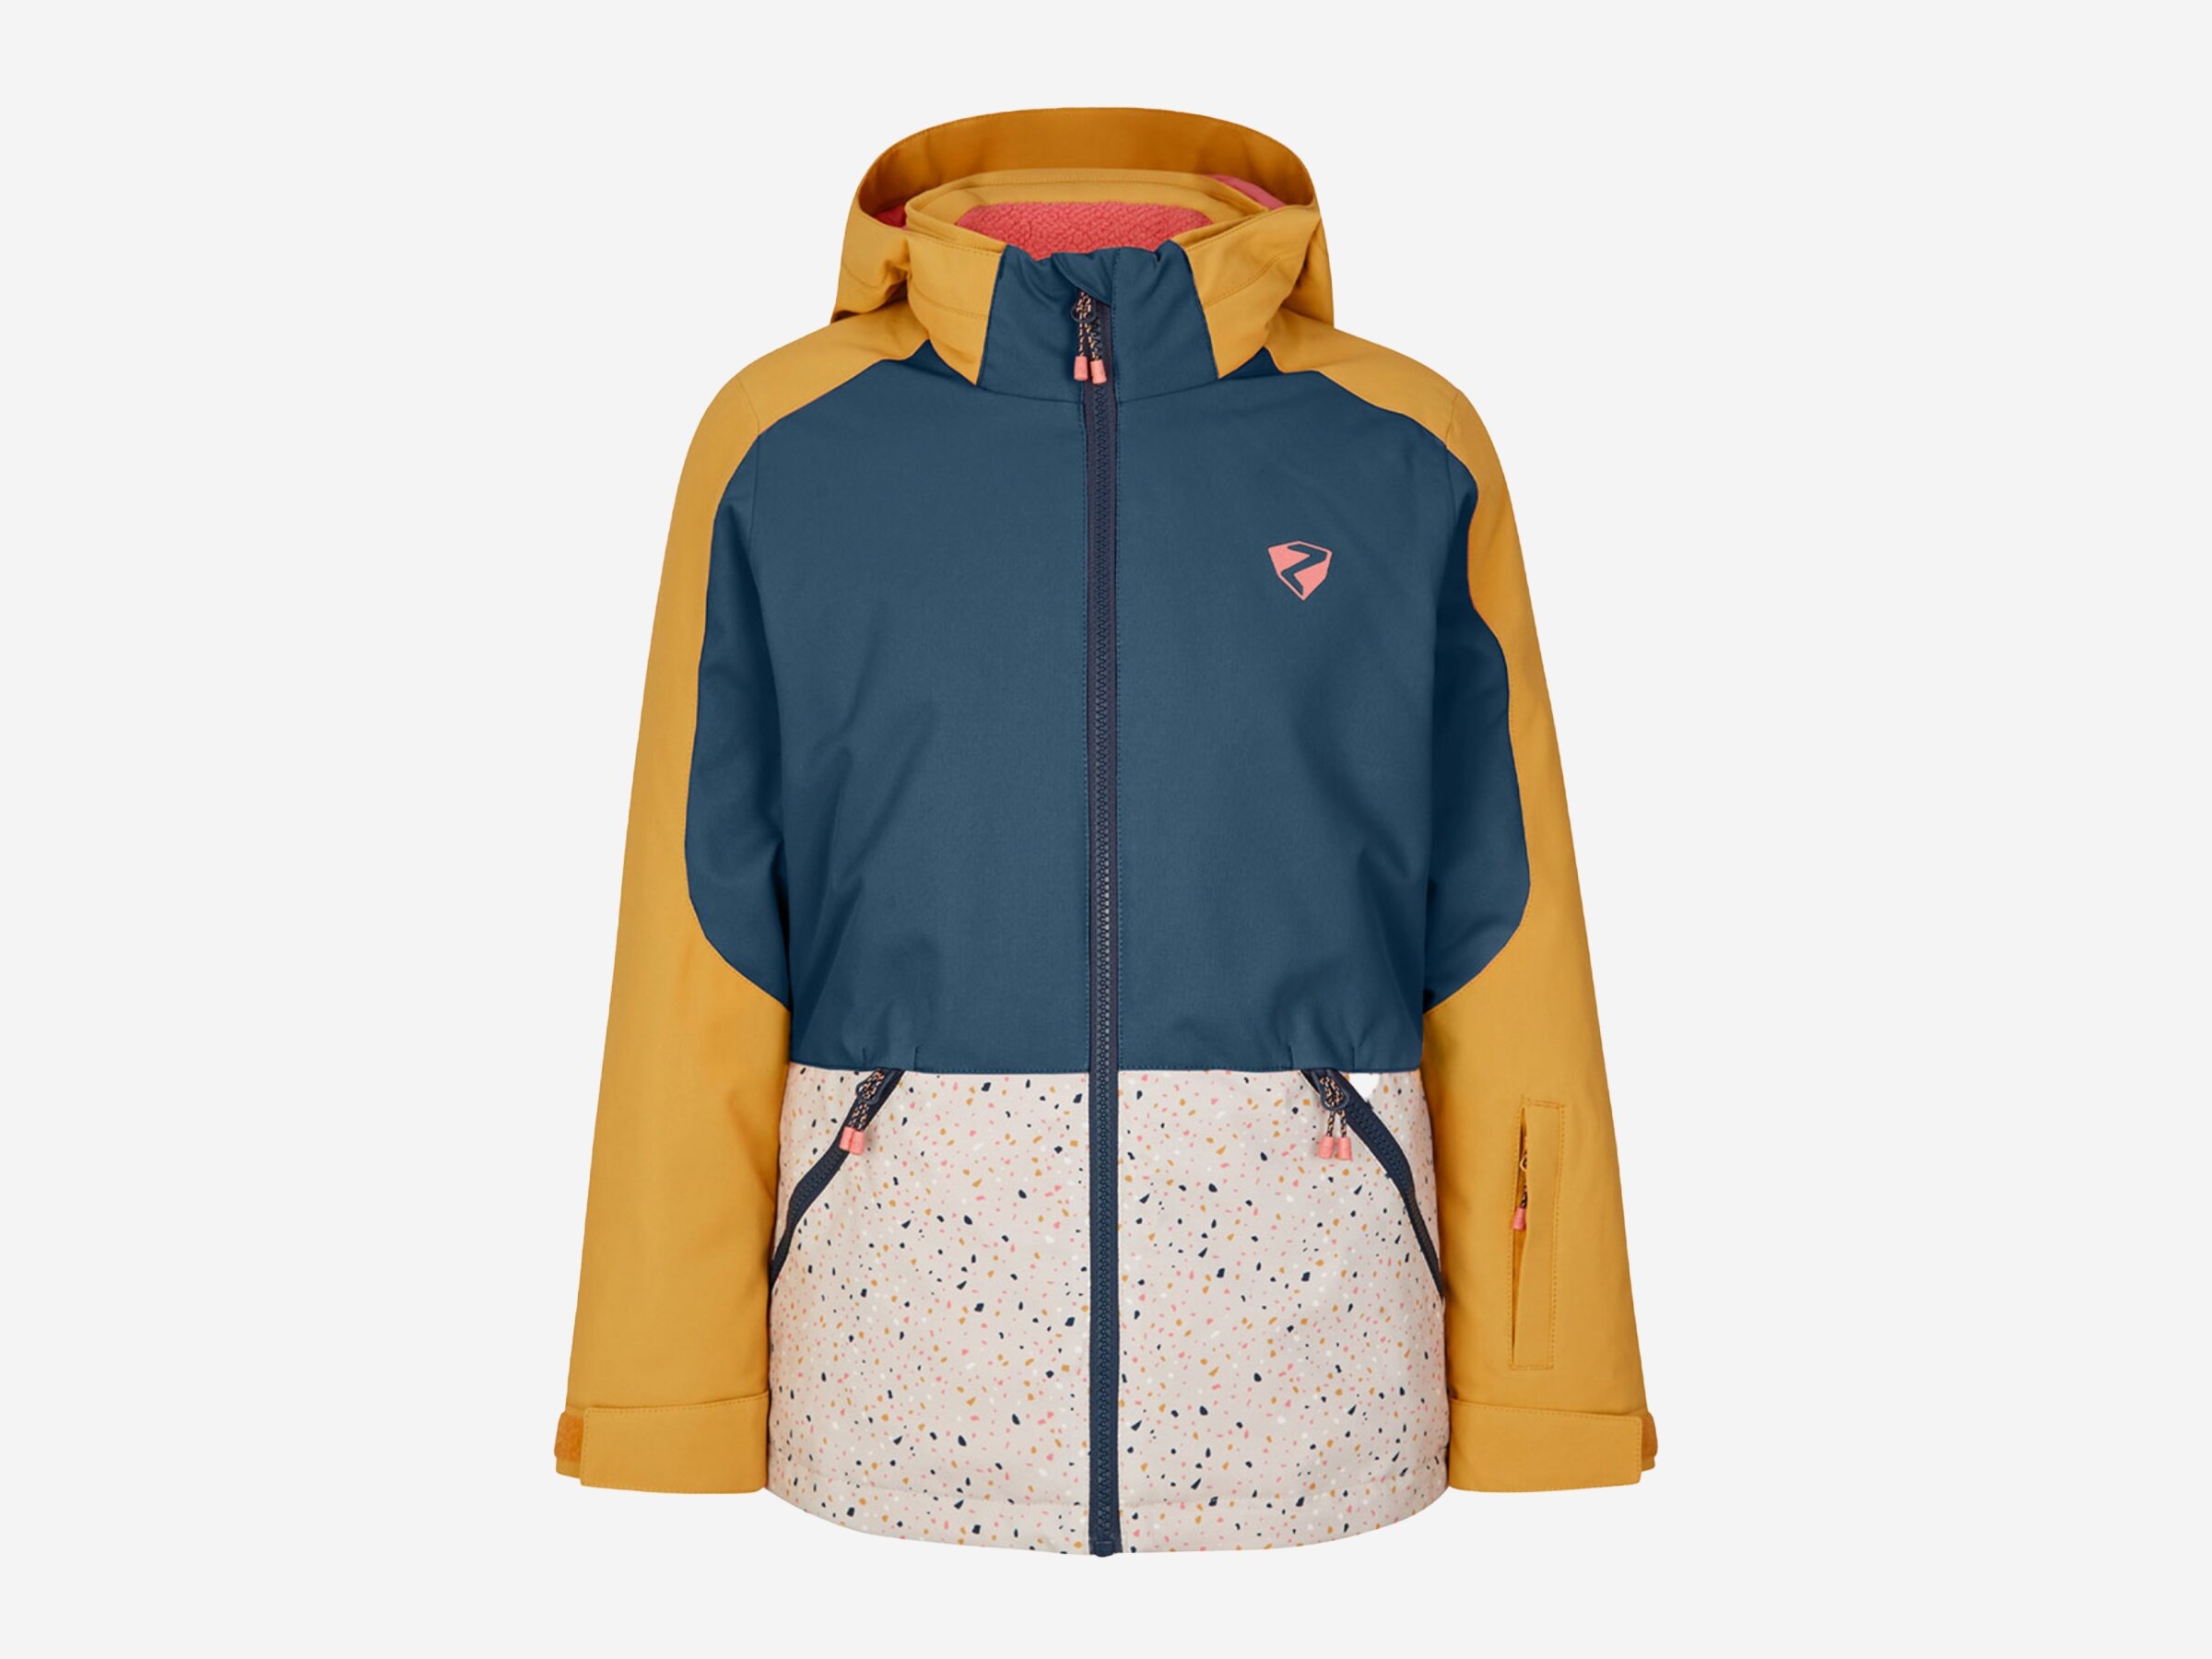 Ziener Kinder Jacke AMELY | about sports